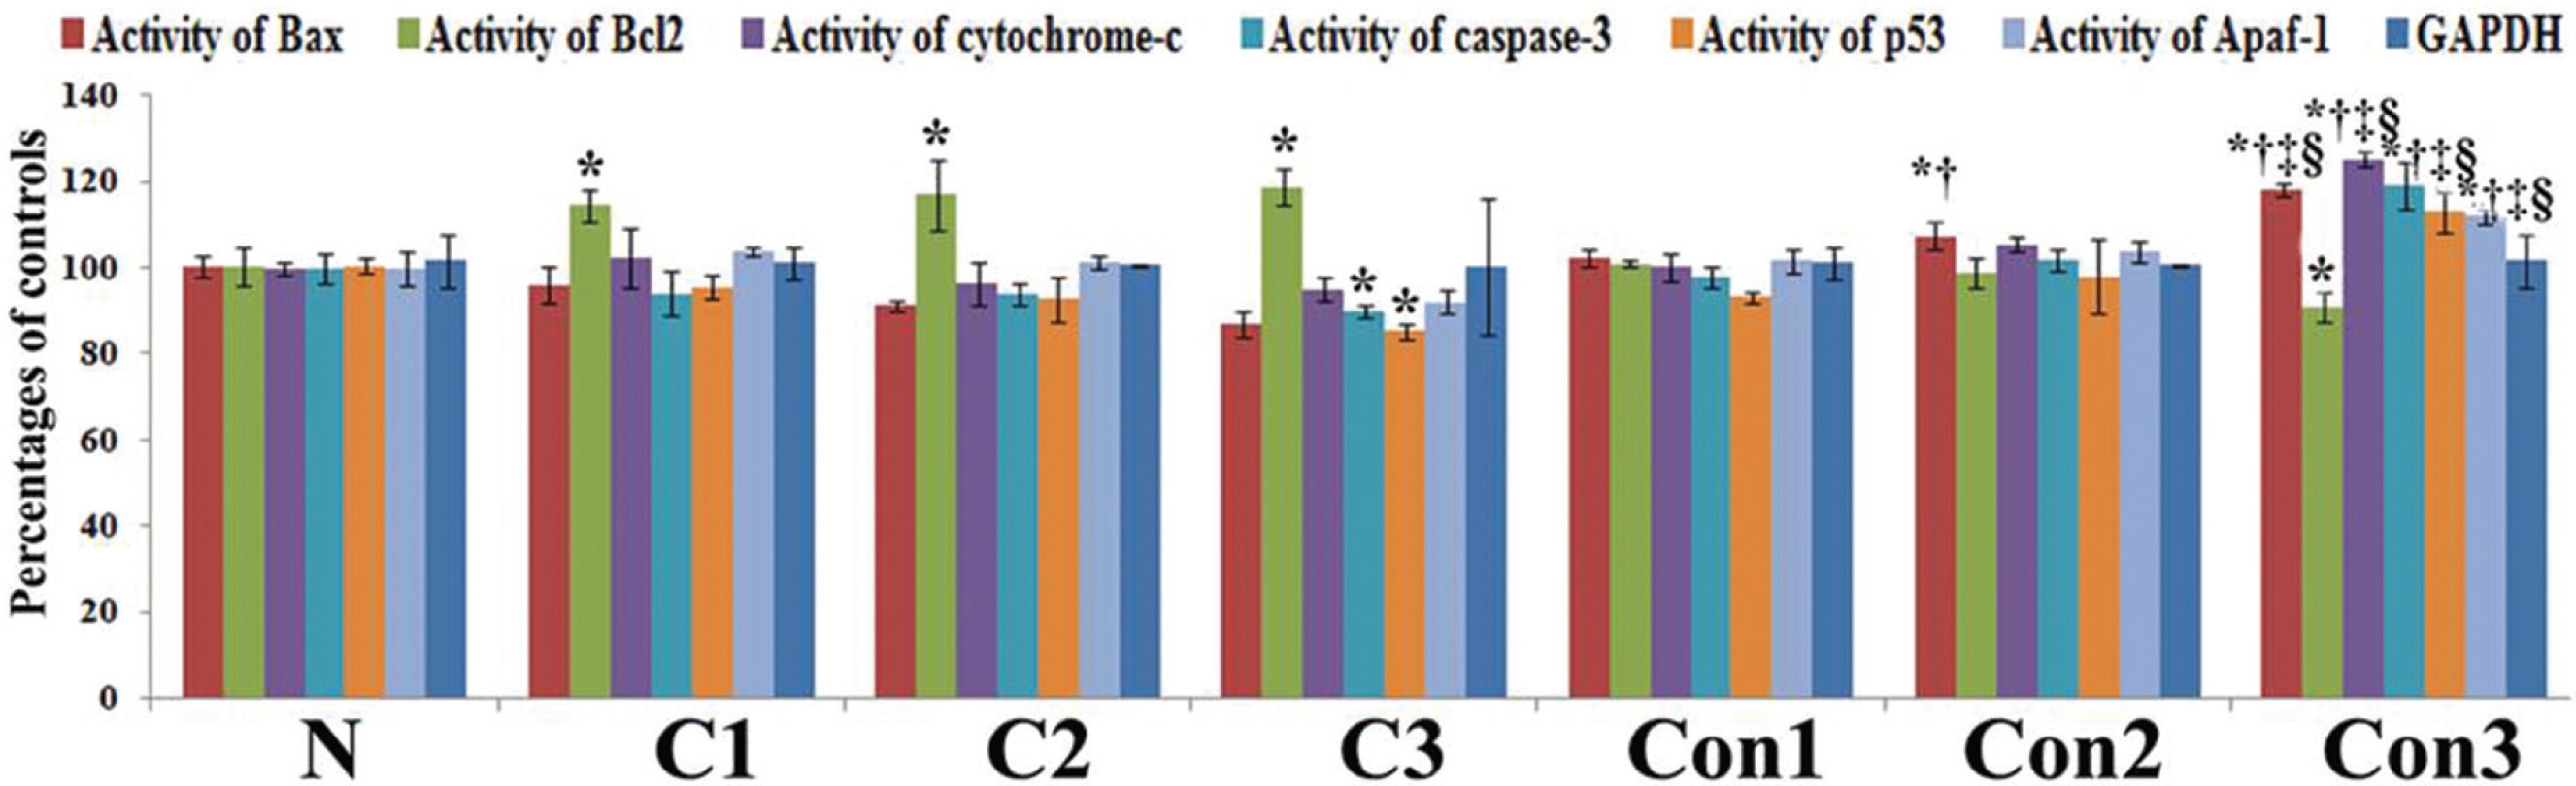 Protein expressions of different apoptotic markers by ELISA. *P < 0.05 normal (N) vs. cancer (C1, C2, C3) and normal vs. Condurango
(Con) treatment at the 5th, 6th & 7th month (Con1, Con2 and Con3). †P < 0.05 cancer vs. Condurango treatment at the 5th, 6th & 7th month. ‡P < 0.001
normal vs. cancer and normal vs. Condurango treatment at the 5th, 6th 7th month. §P < 0.05 cancer vs. Condurango treatment at the 5th, 6th & 7th
month.
Figure